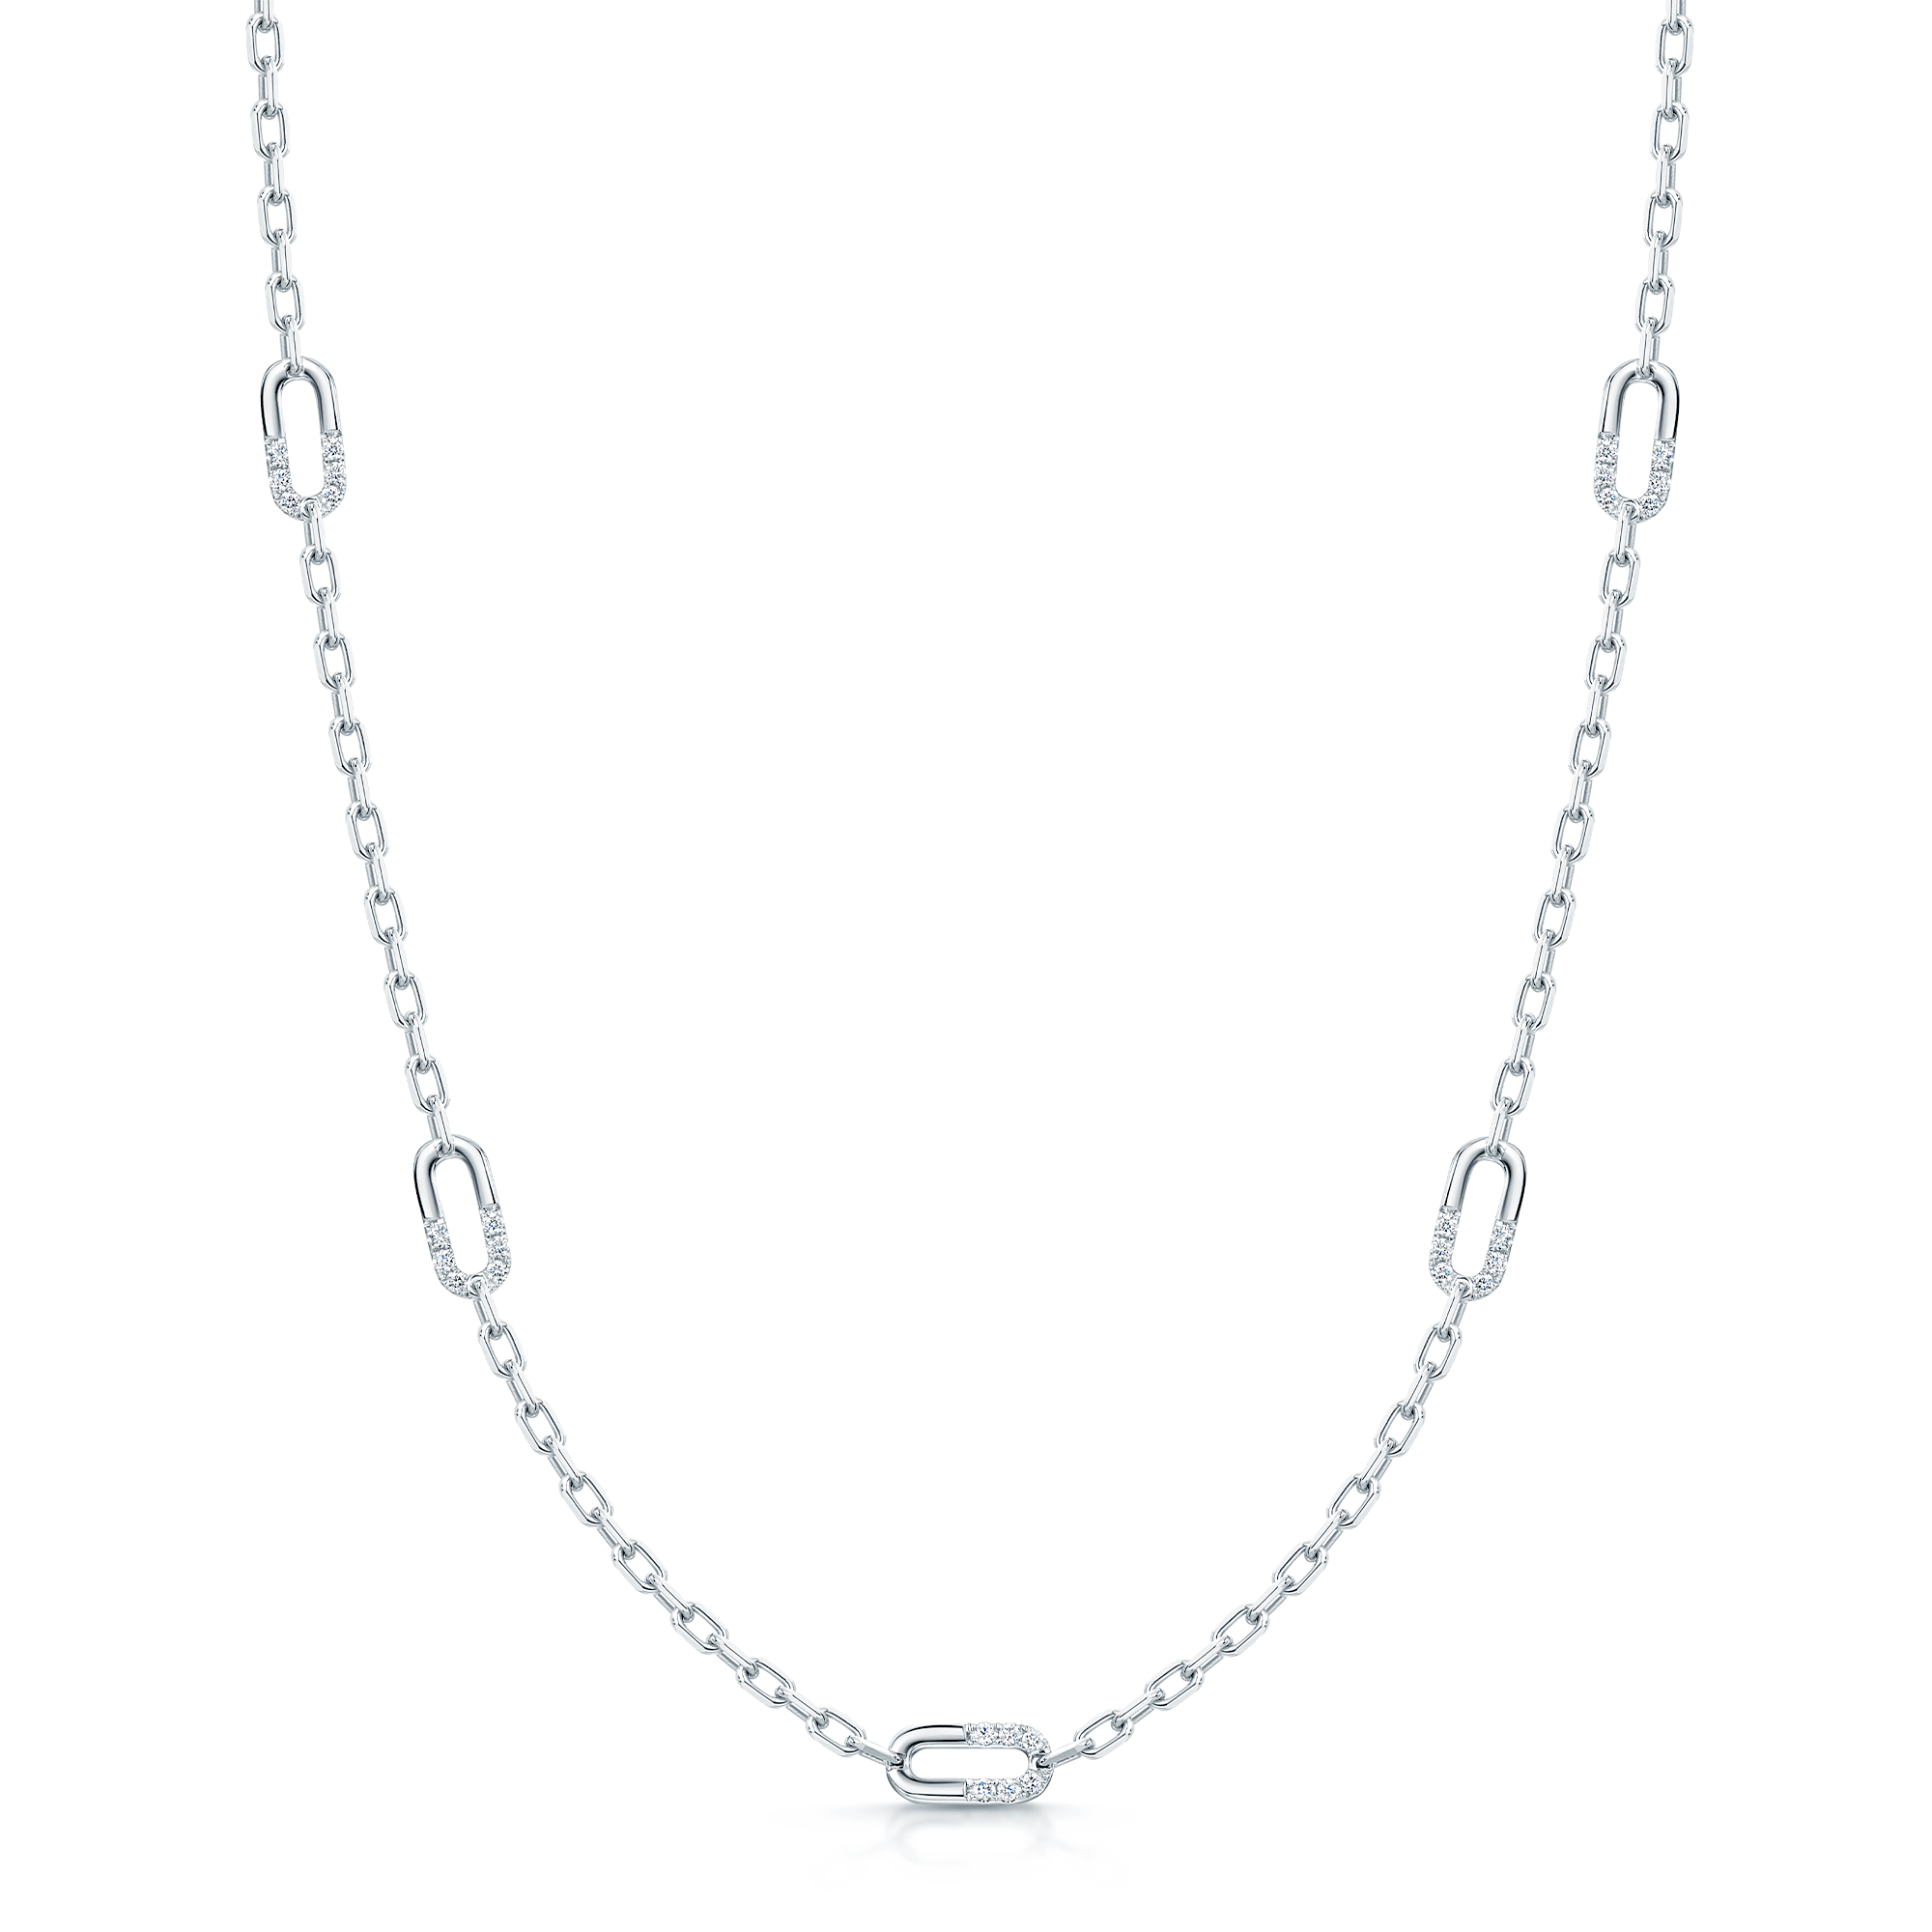 Verve Collection 18ct White Gold Diamond Loop Necklace